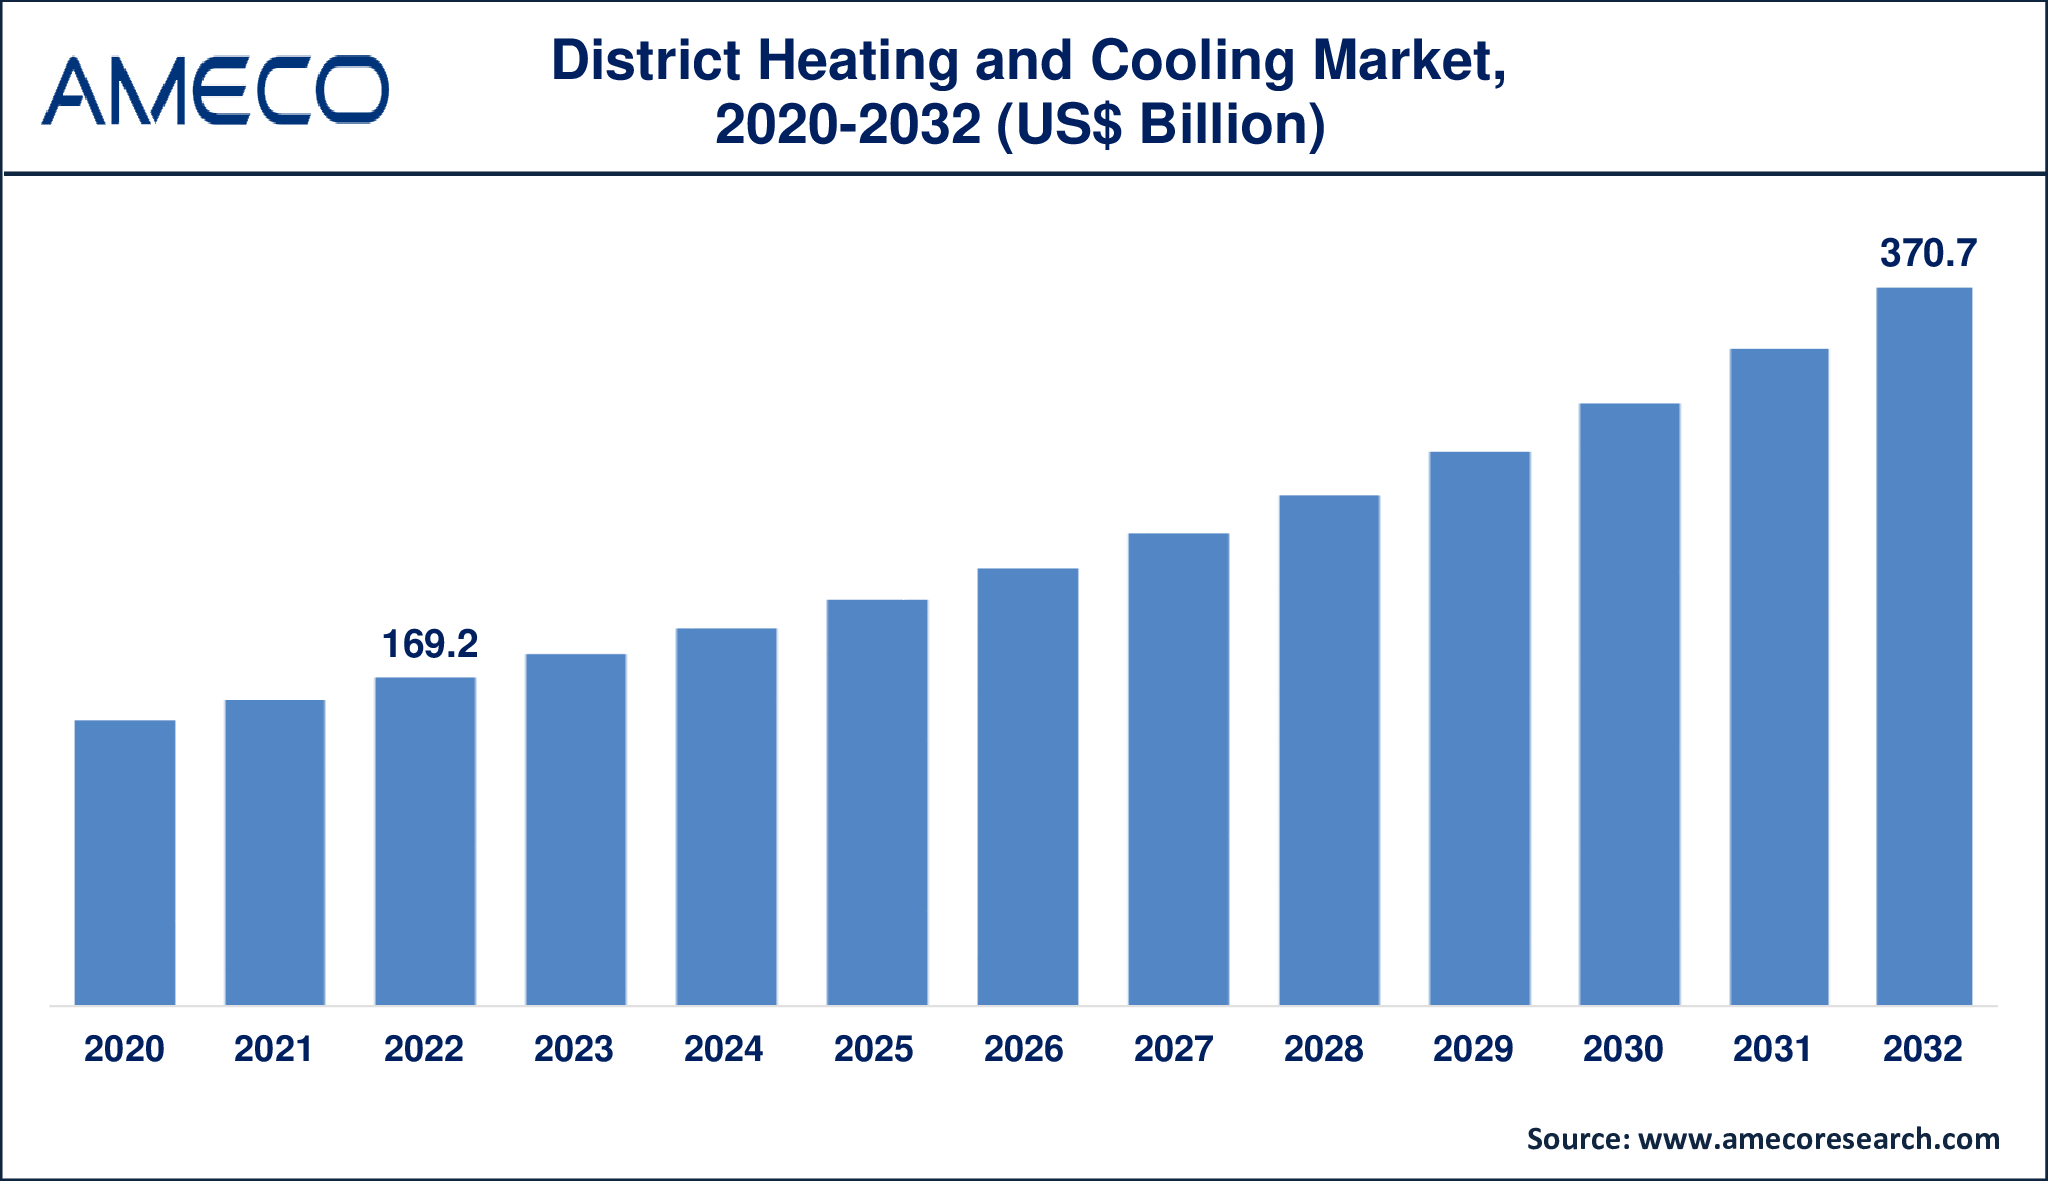 District Heating and Cooling Market Dynamics